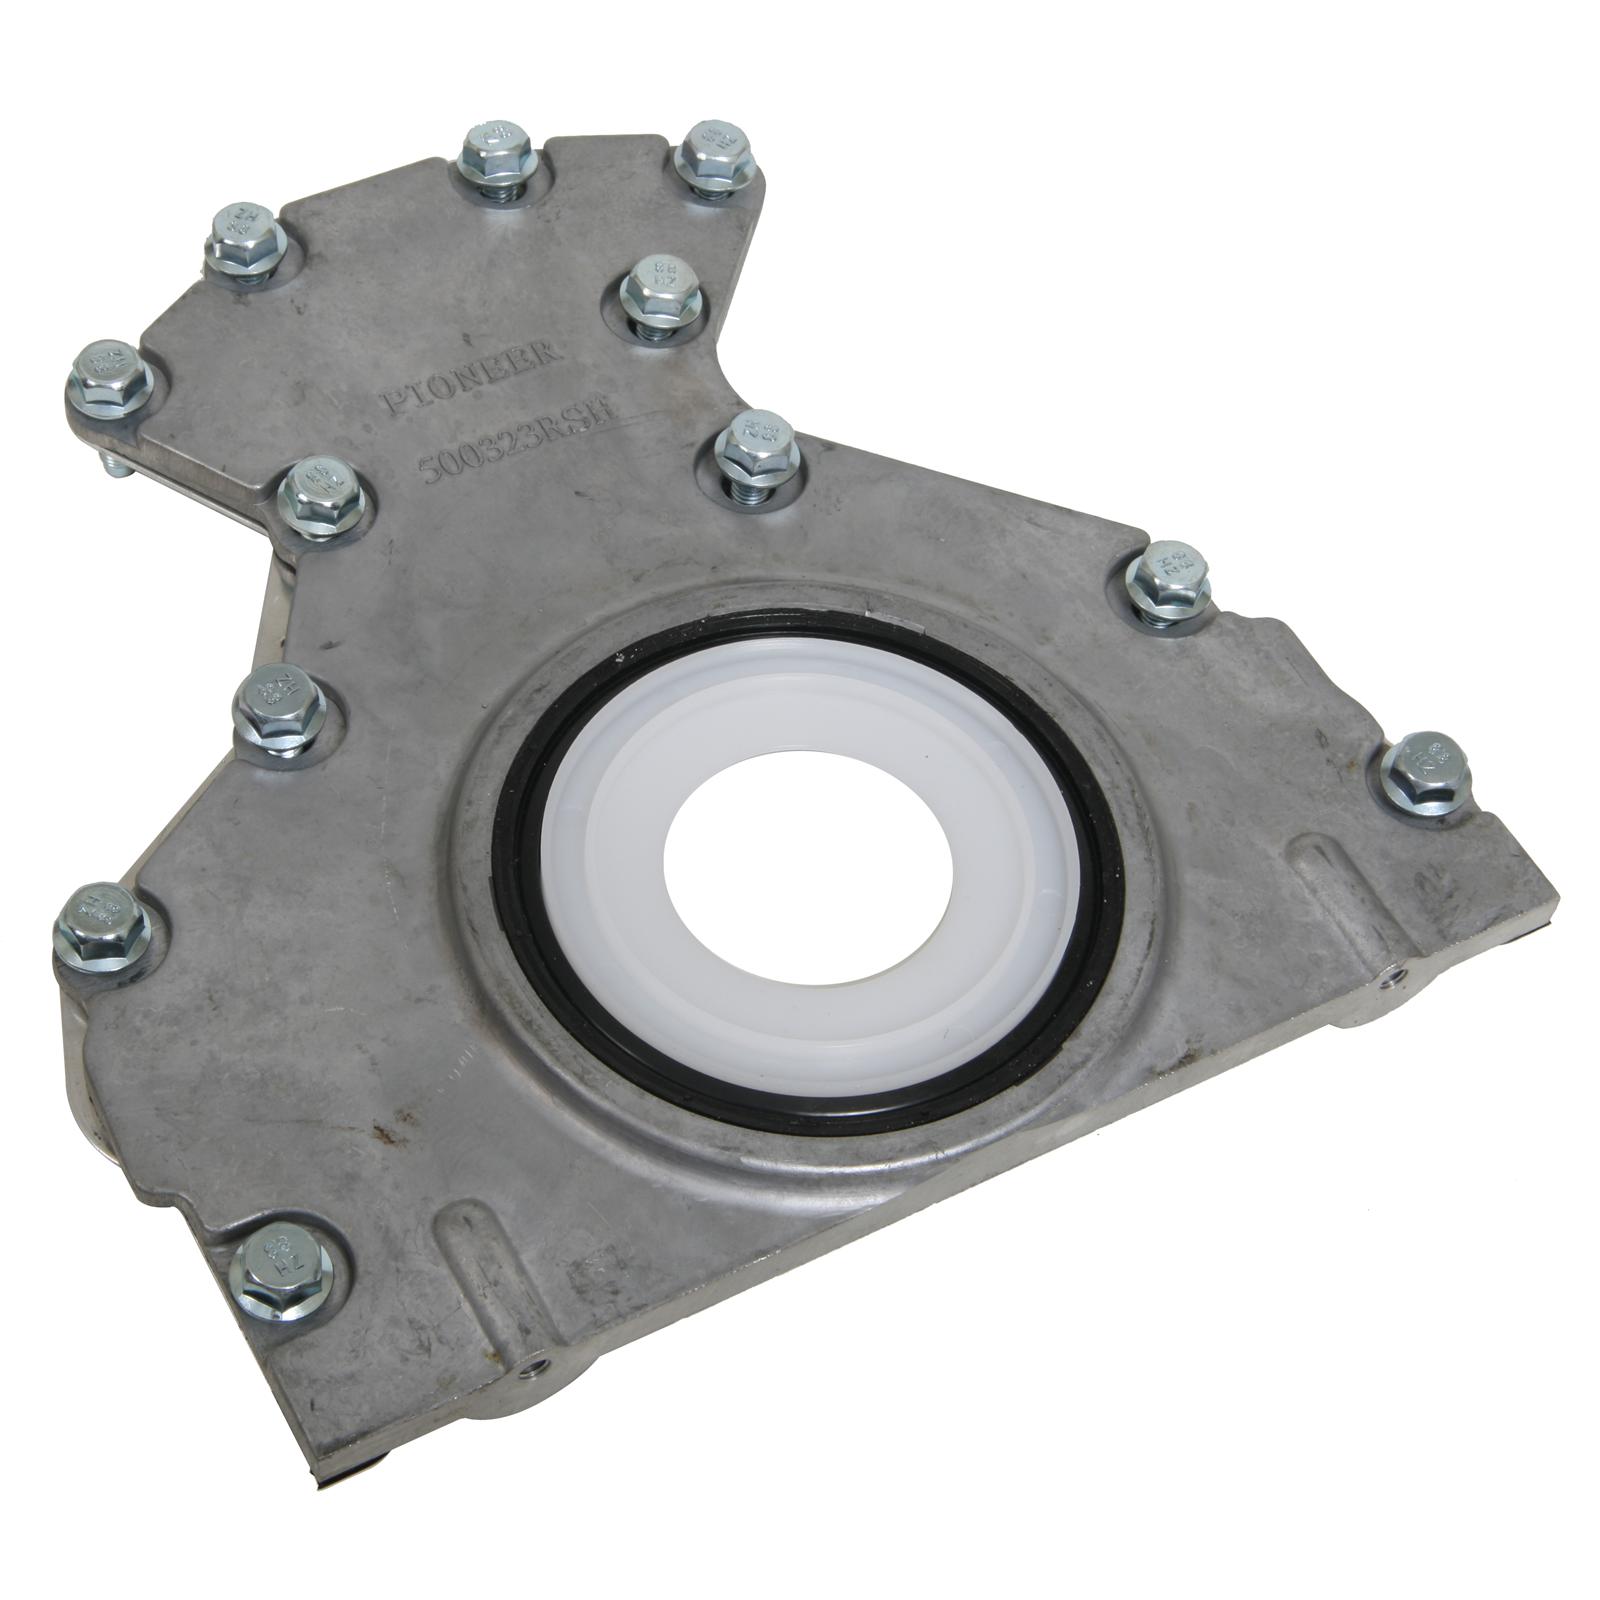 LS Rear Main Seal Retainer For Gen 3/4 engines